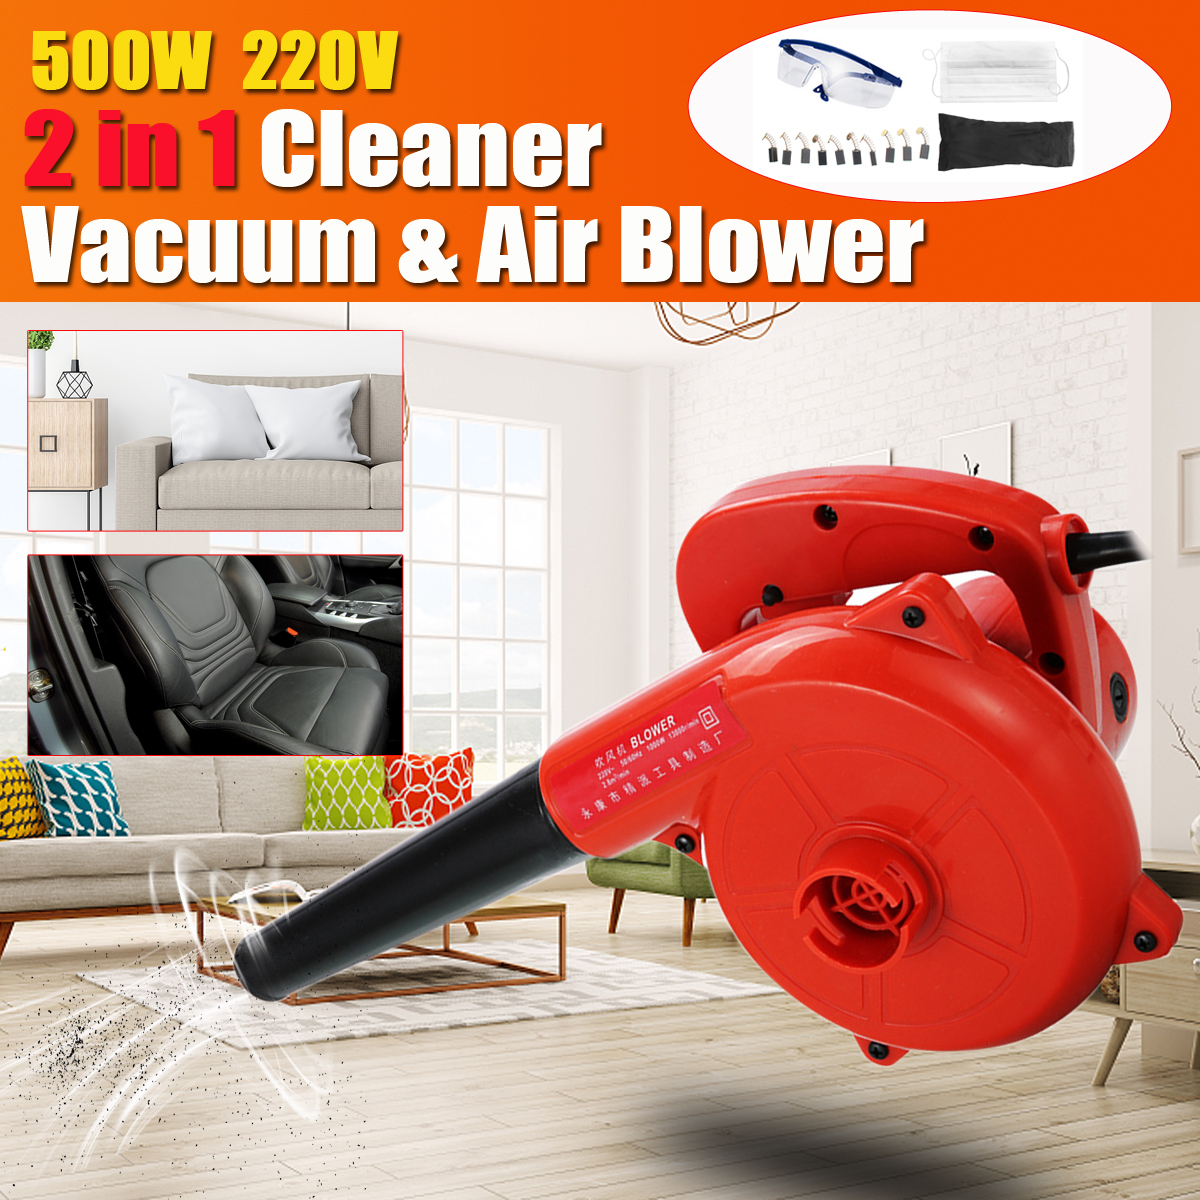 220V-500W-Electric-Air-Blower-Handheld-Computer-Cleaning-Machine-Home-Car-Dust-Vacuum-Cleaner-W-Mask-1734959-1